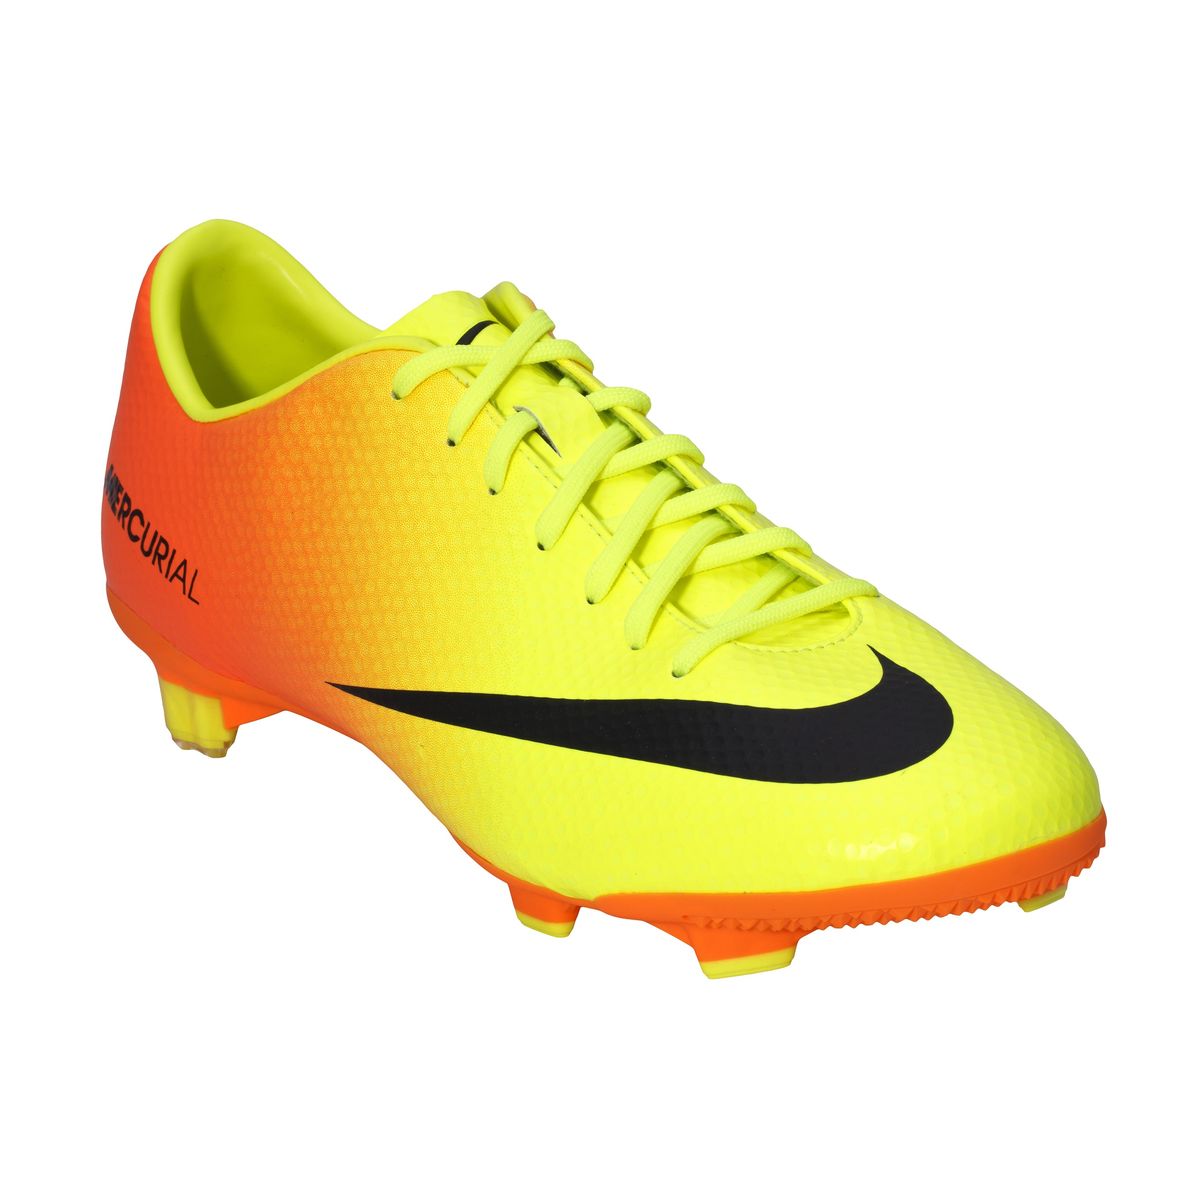 nike mercurial soccer boots price in south africa